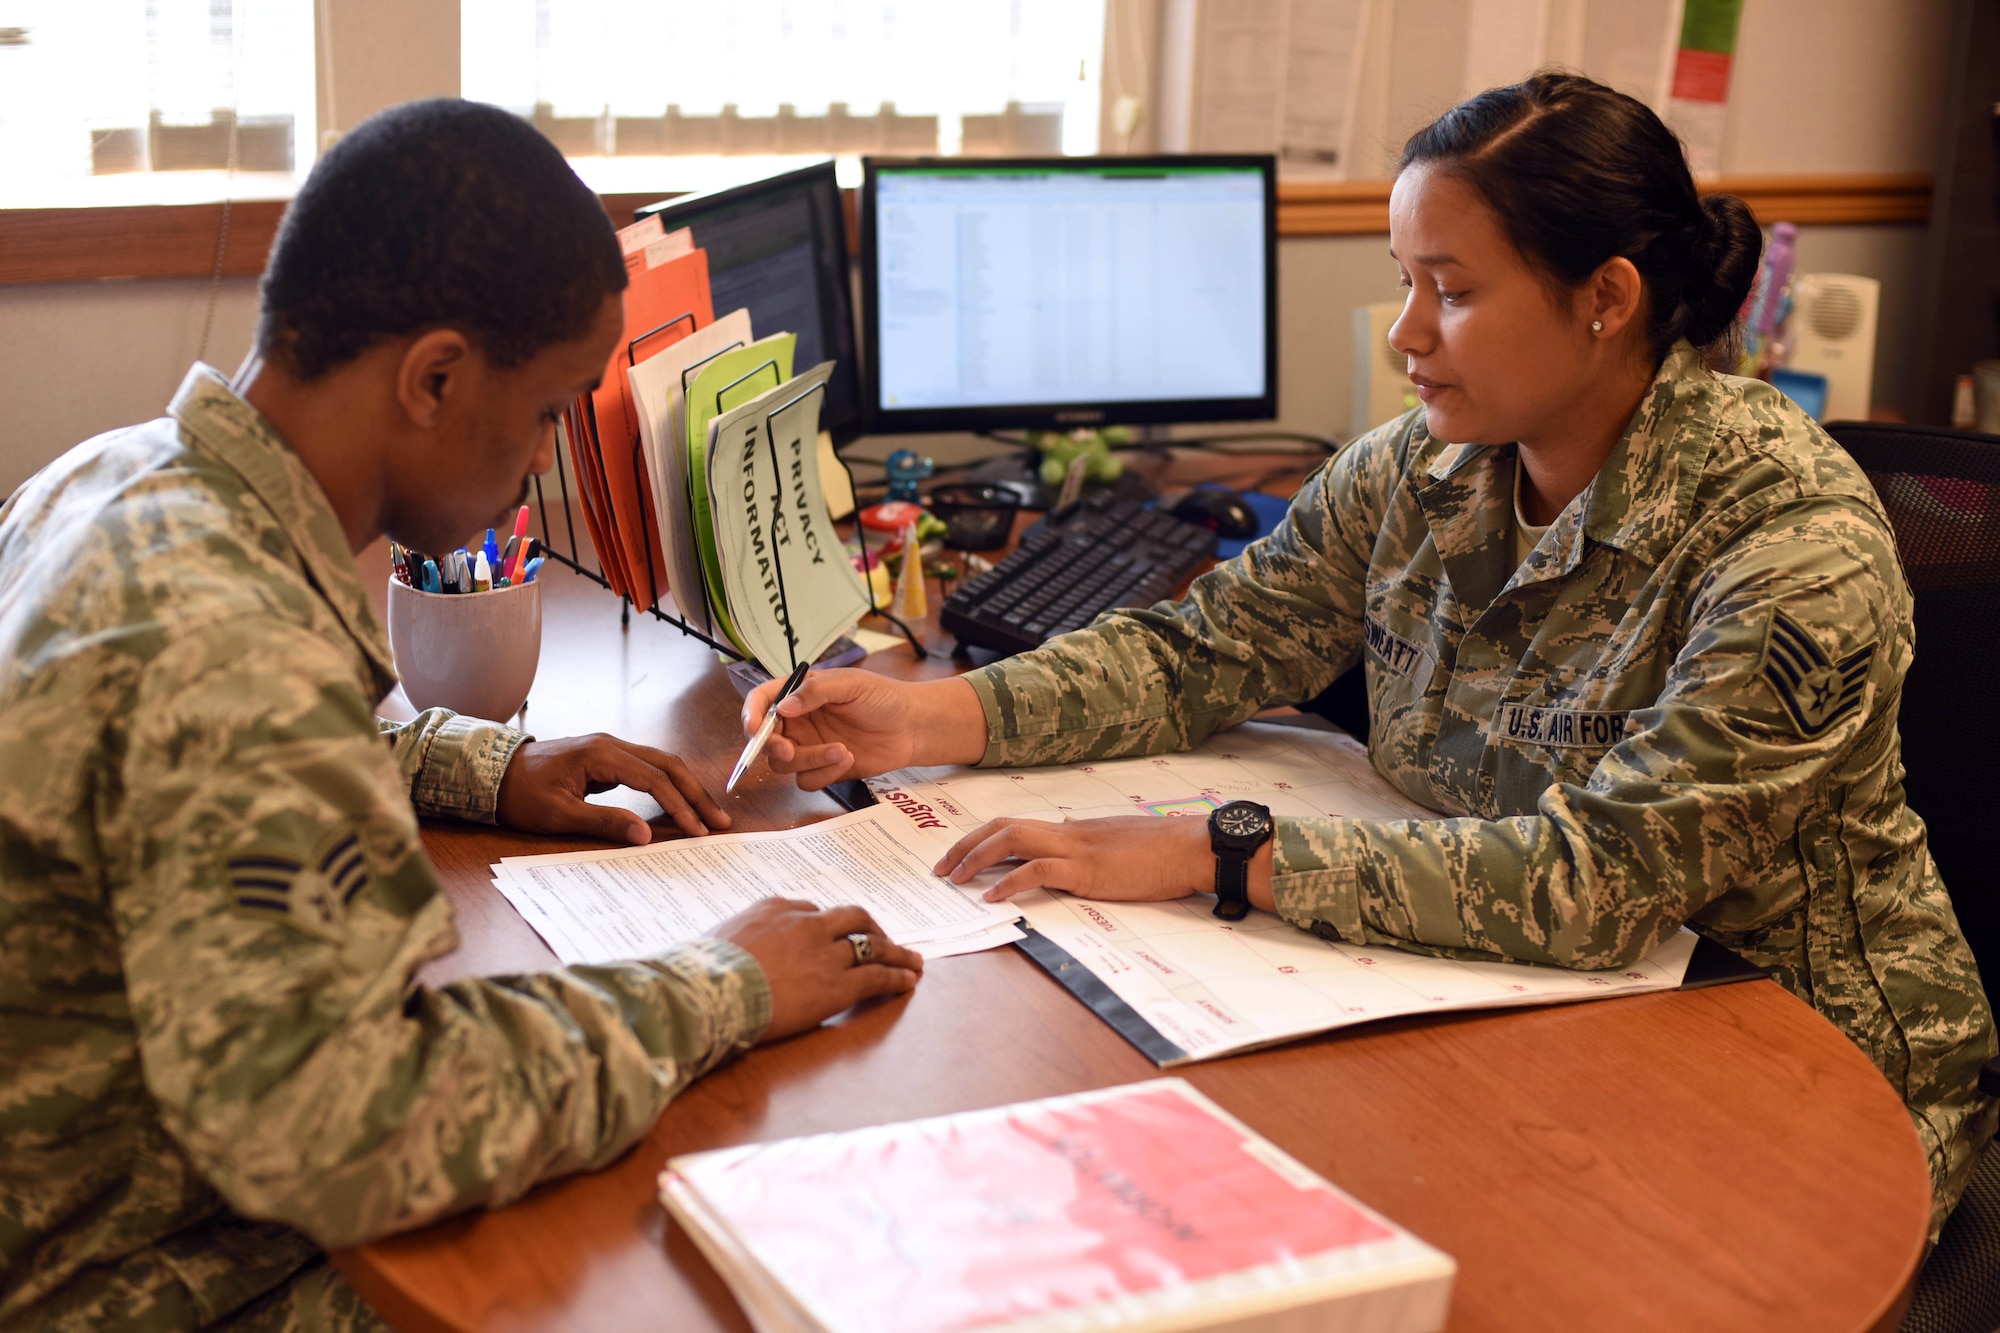 Senior Airman Napoleon Lark, 341st Force Support Squadron career development journeyman, left, evaluates re-enlistment papers with Staff Sgt. Catherine Sweatt, 341st FSS relocations specialist, at Malmstrom Air Force Base, Mont., Aug. 24. Active-duty members must apply and fill out all the required documents before taking the Oath of Enlistment. (U.S. Air Force photo Airman 1st Class Collin Schmidt)